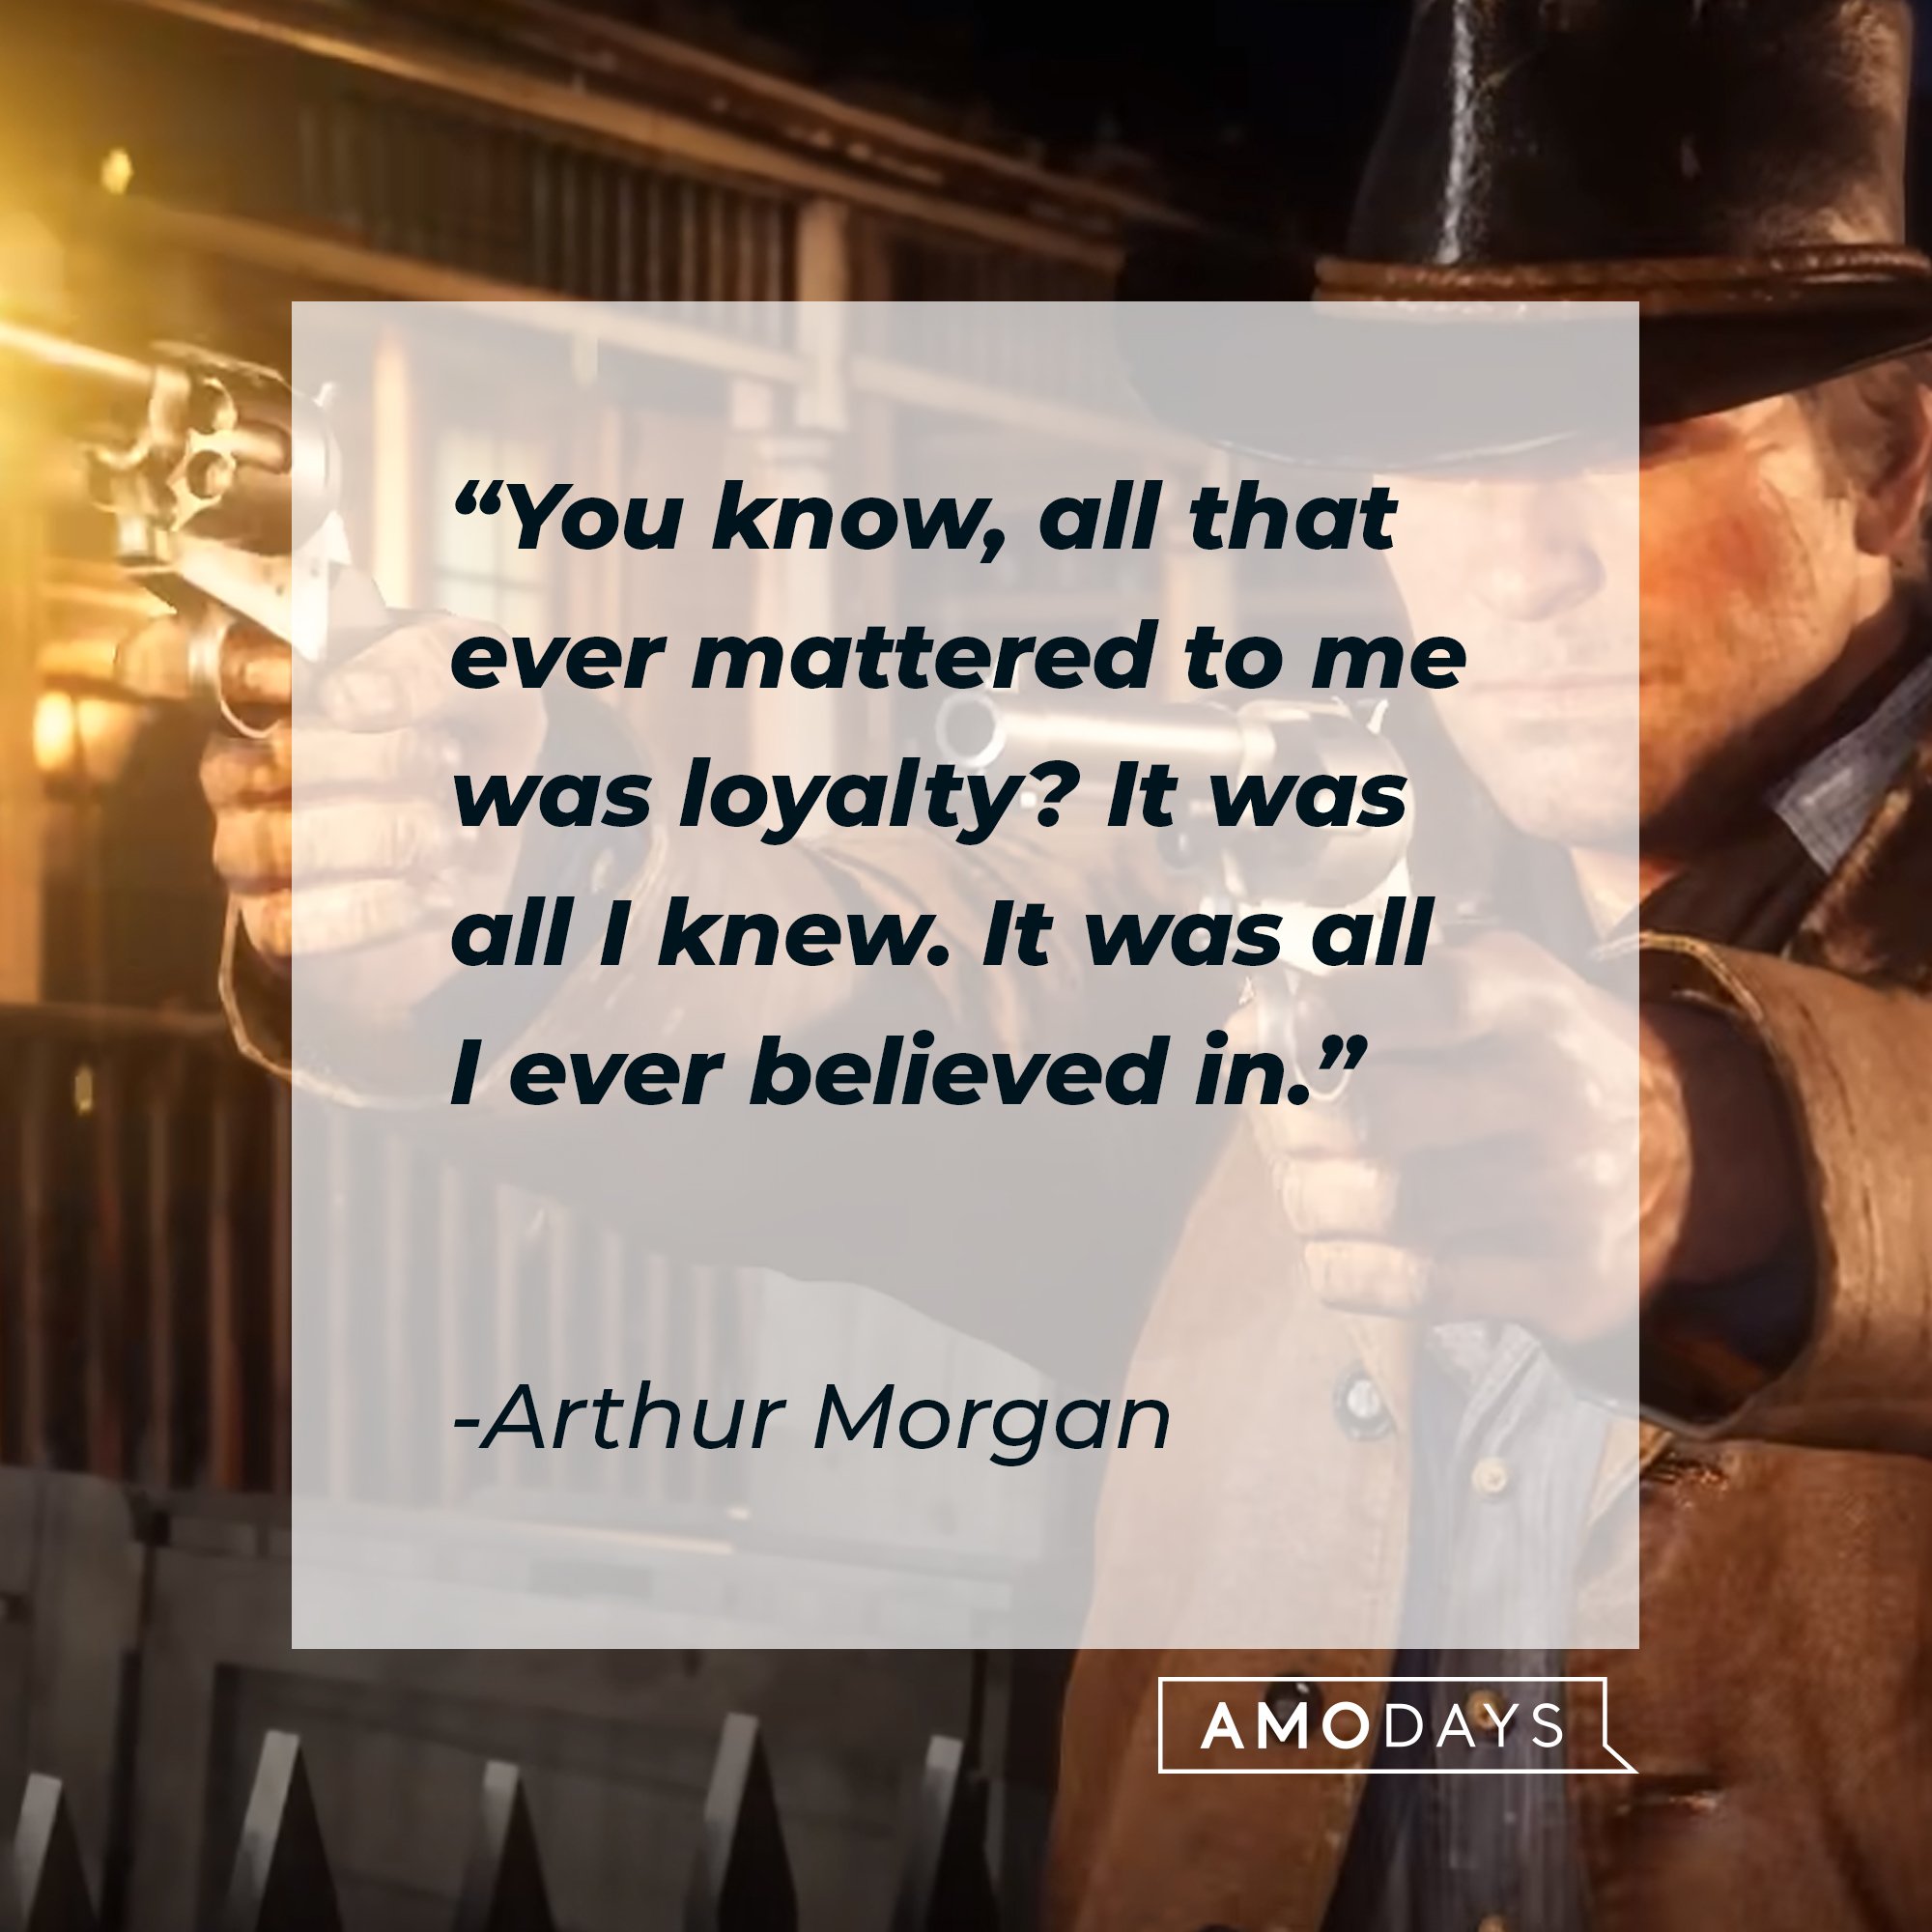 Arthur Morgan's quote: "You know, all that ever mattered to me was loyalty? It was all I knew. It was all I ever believed in." | Image: AmoDays